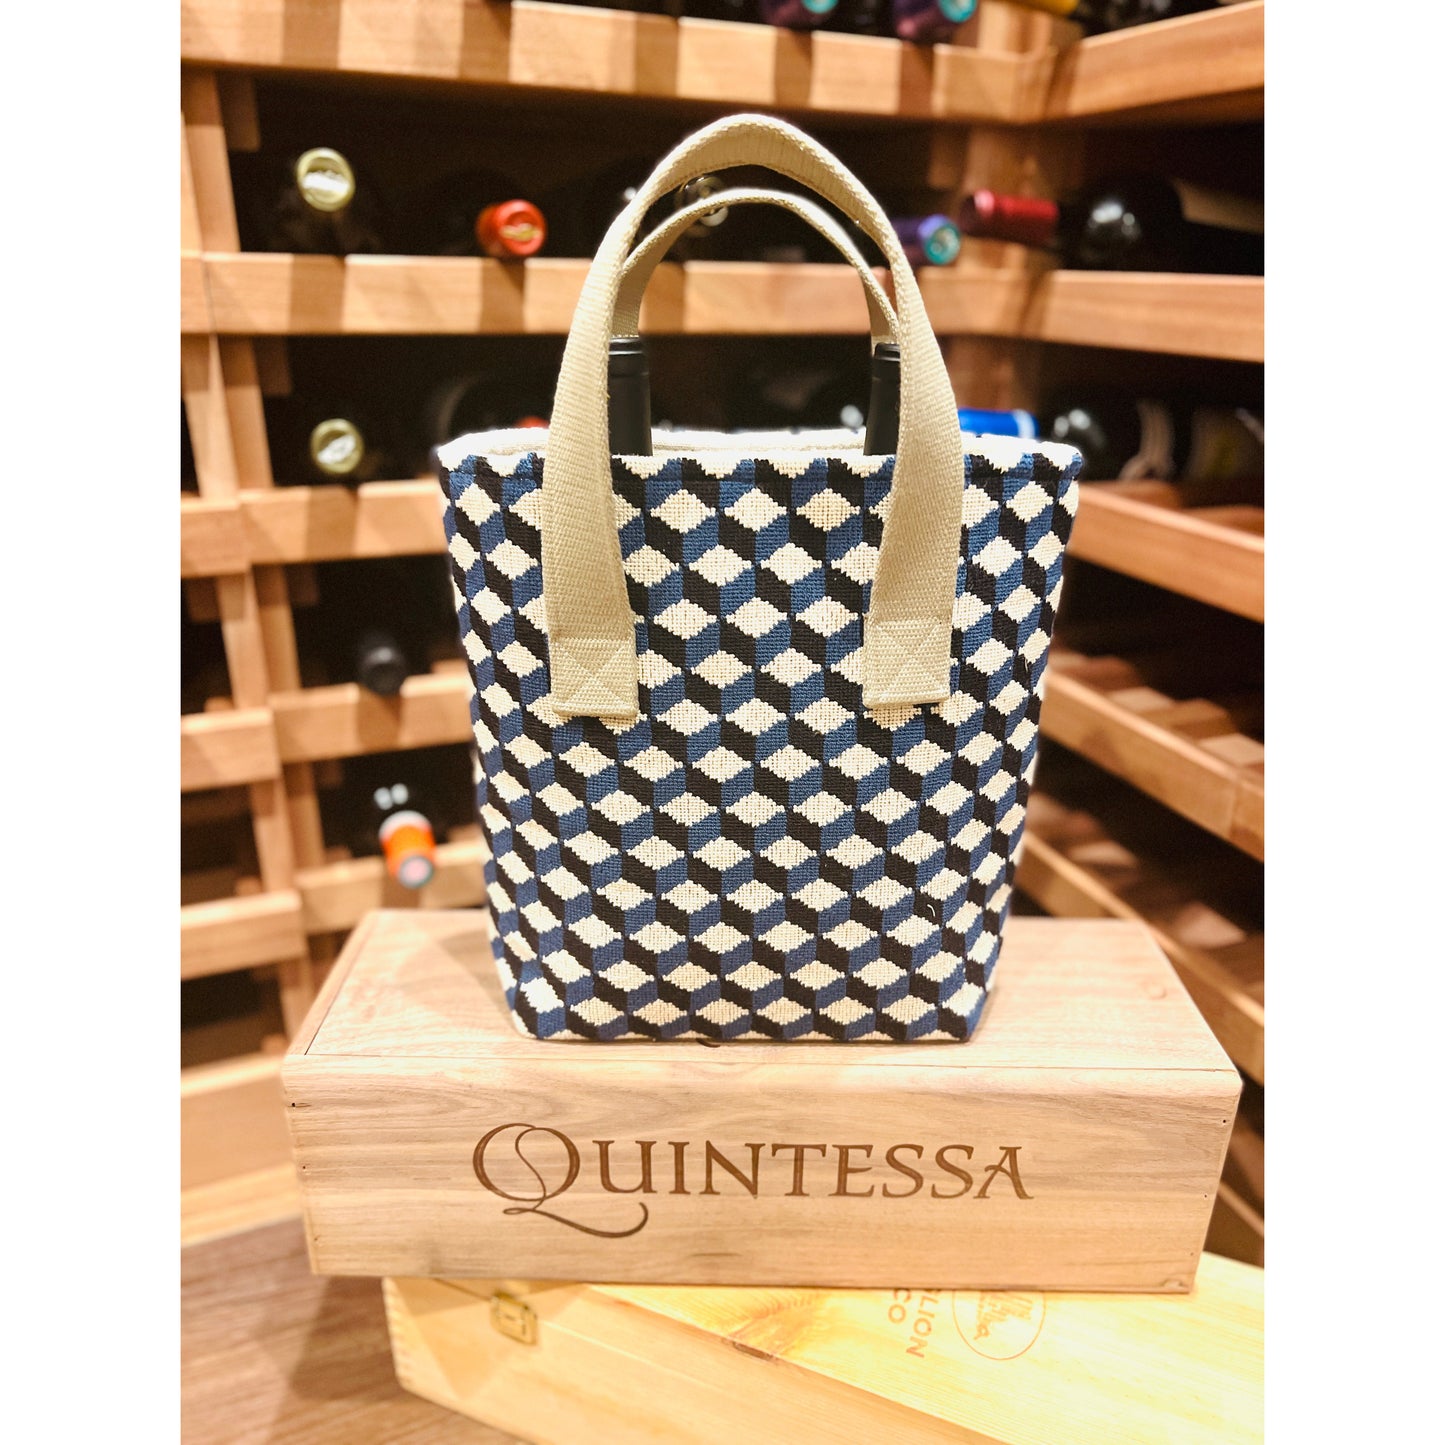 Cobalt Cubed Needlepoint Wine Tote (Double Bottle)